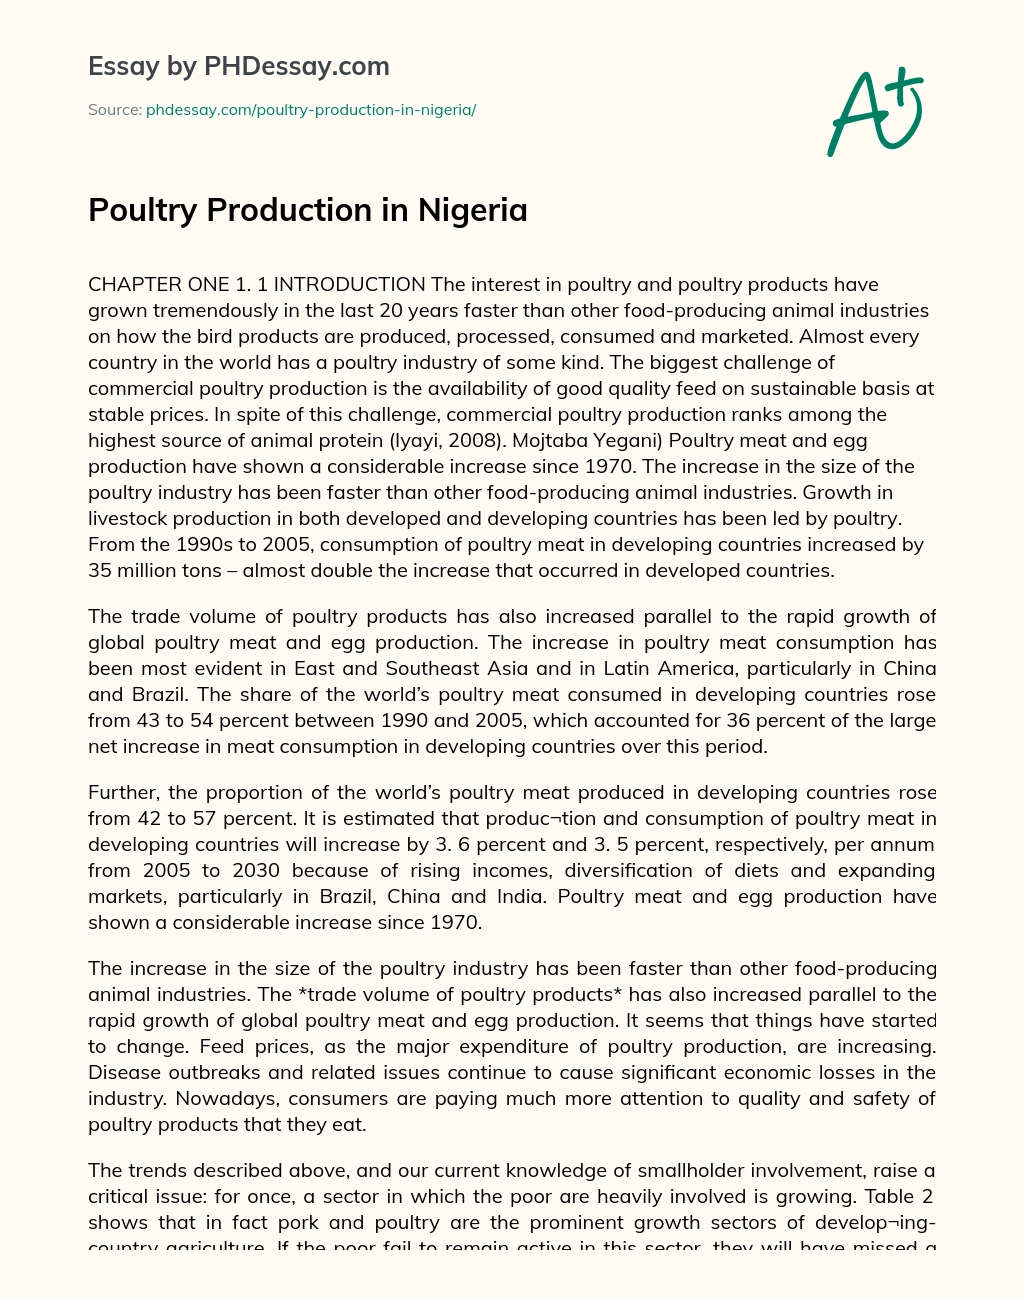 Poultry Production in Nigeria essay